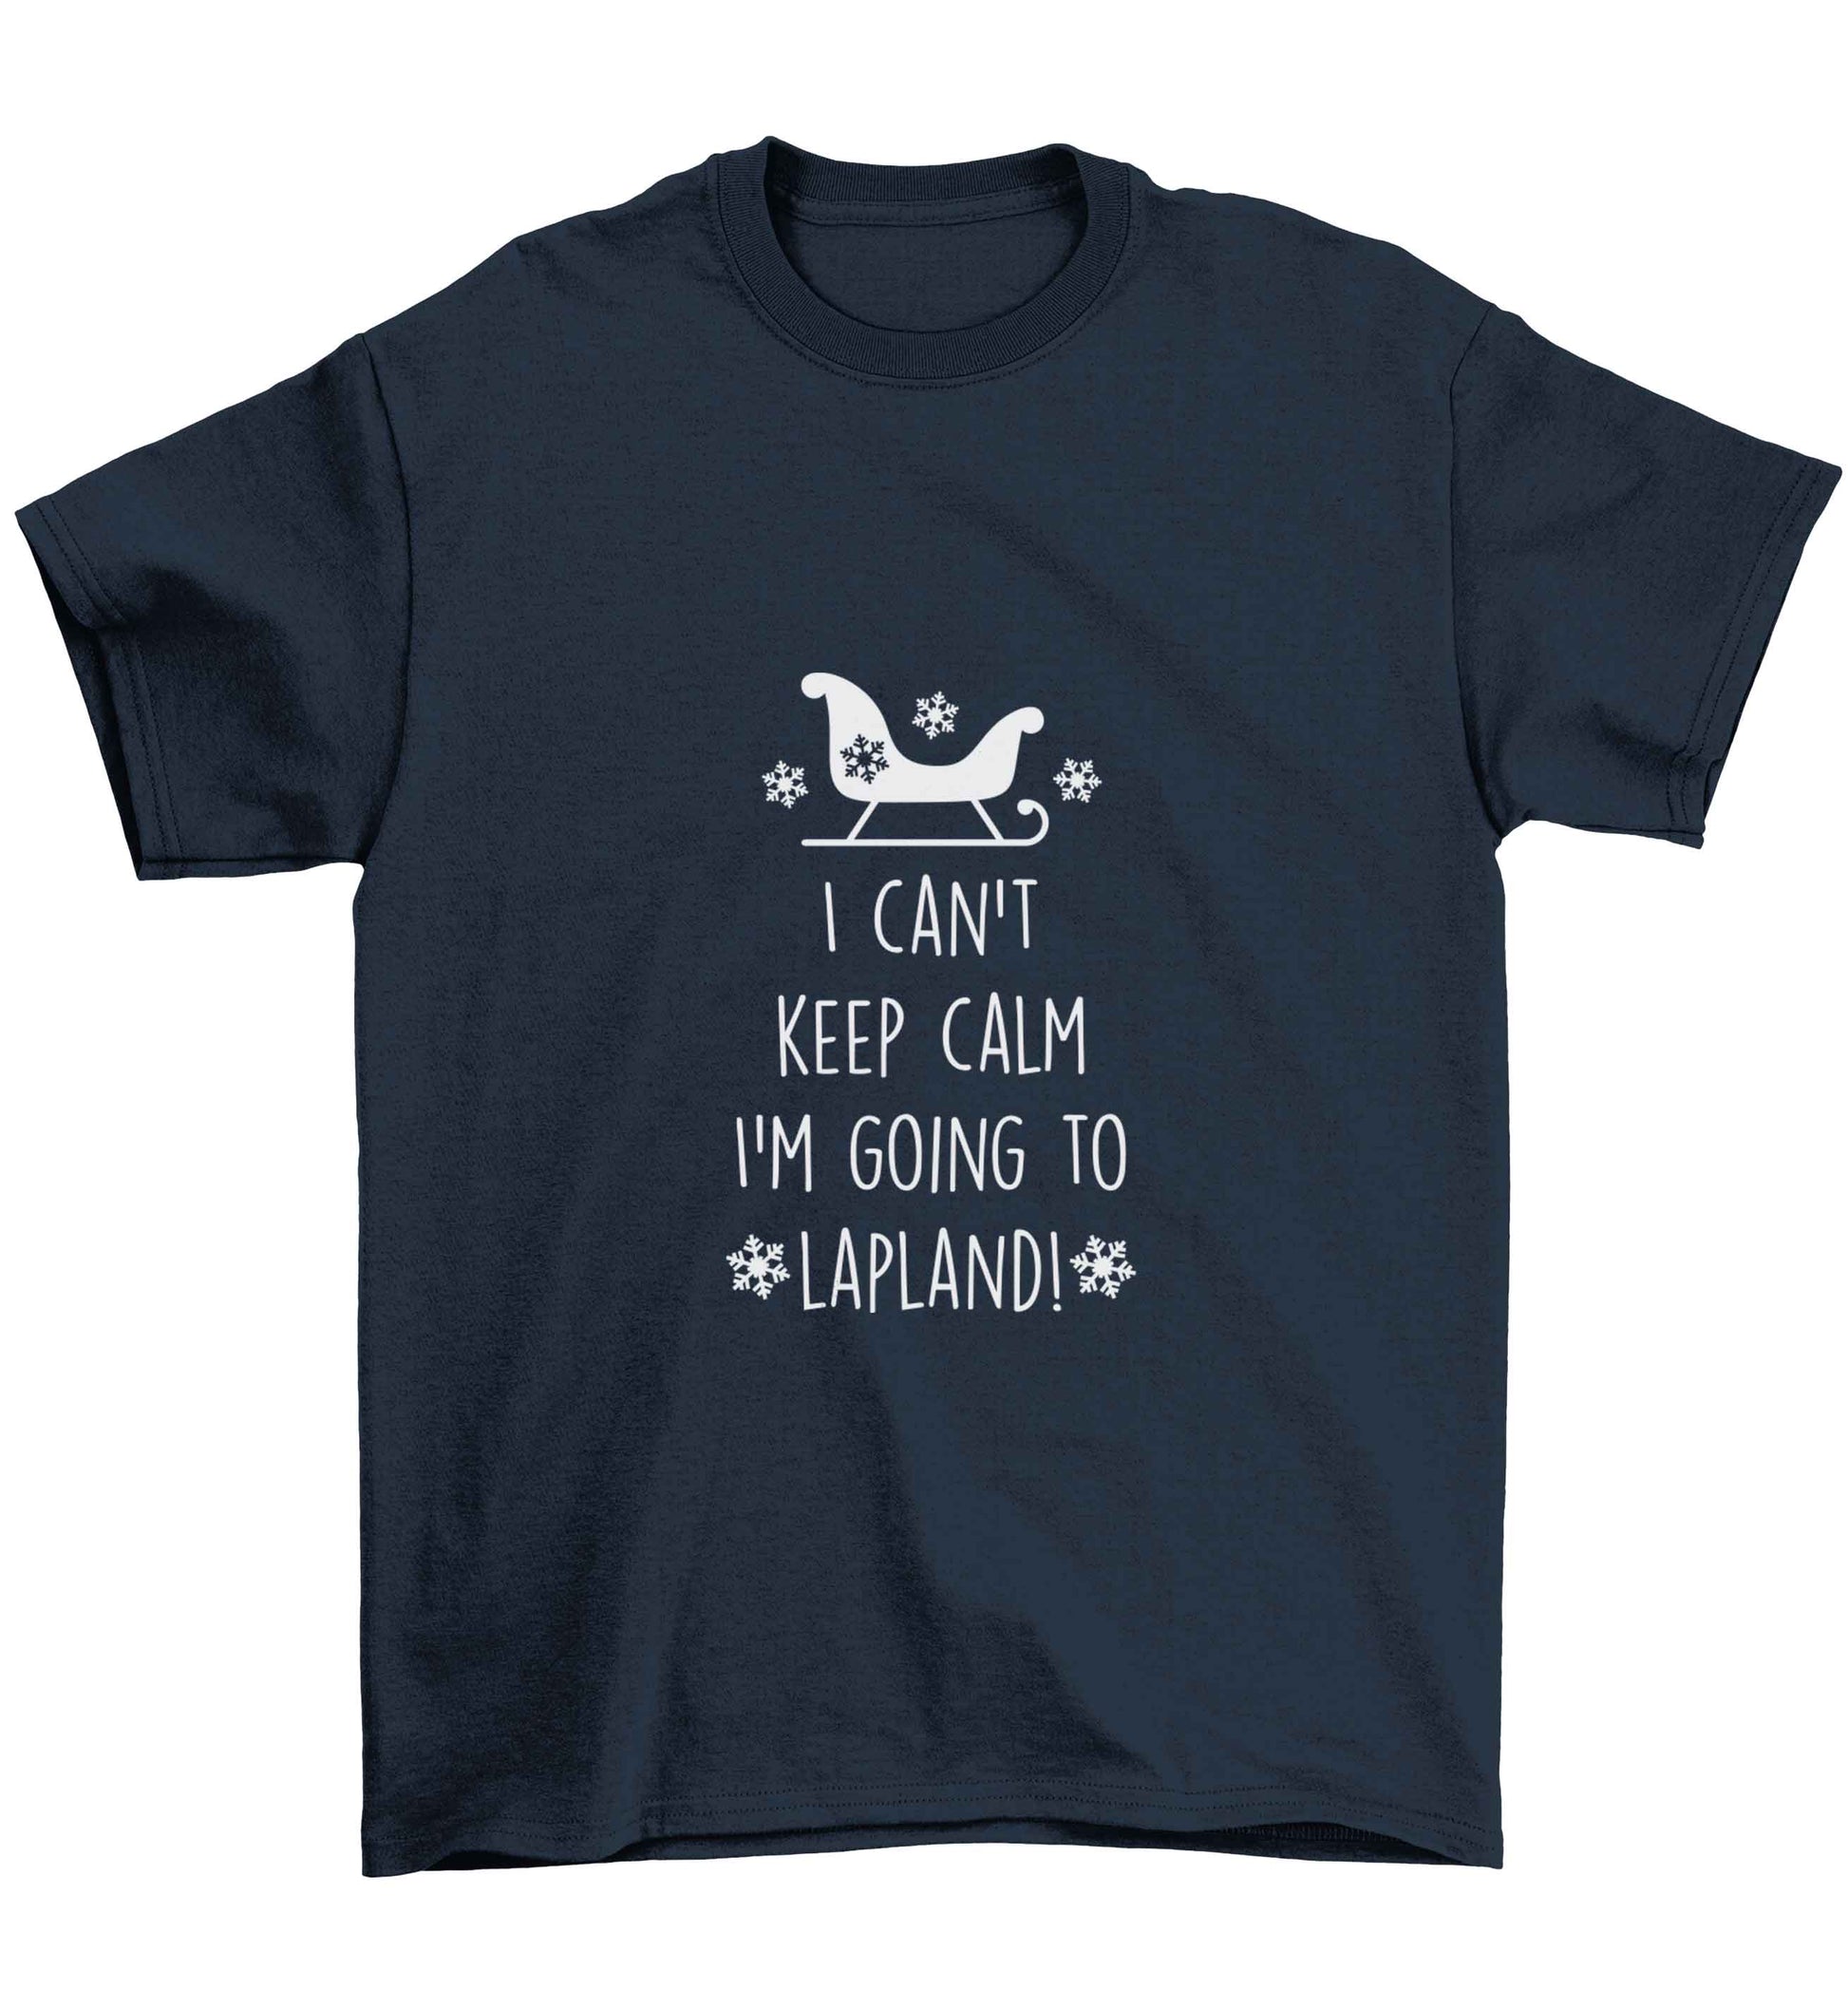 I can't keep calm I'm going to Lapland Children's navy Tshirt 12-13 Years